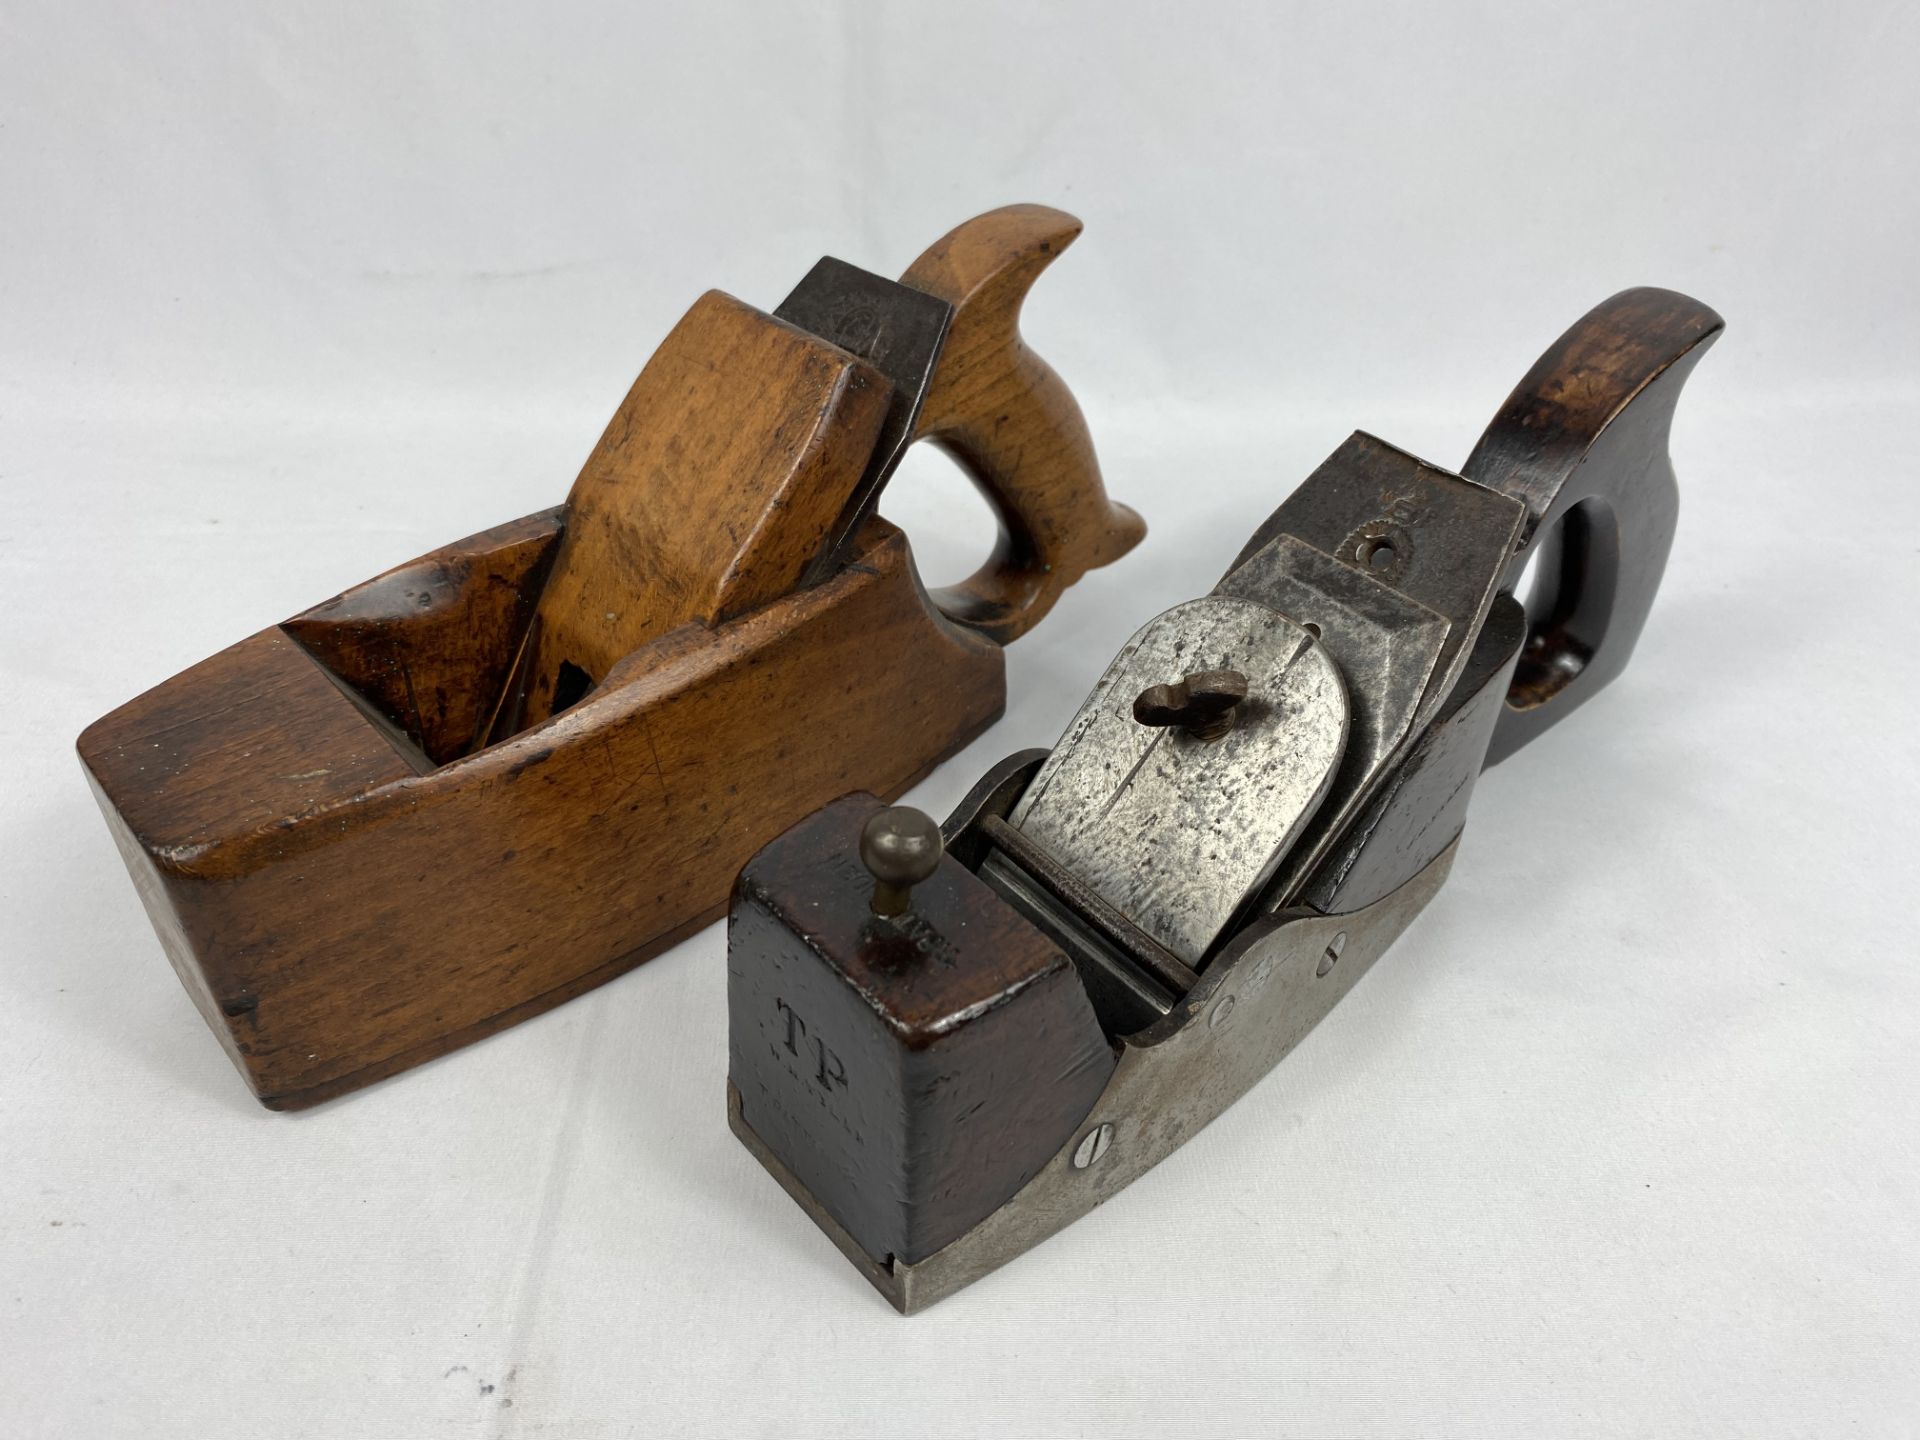 Two wood planes, marked W.M. Tyler